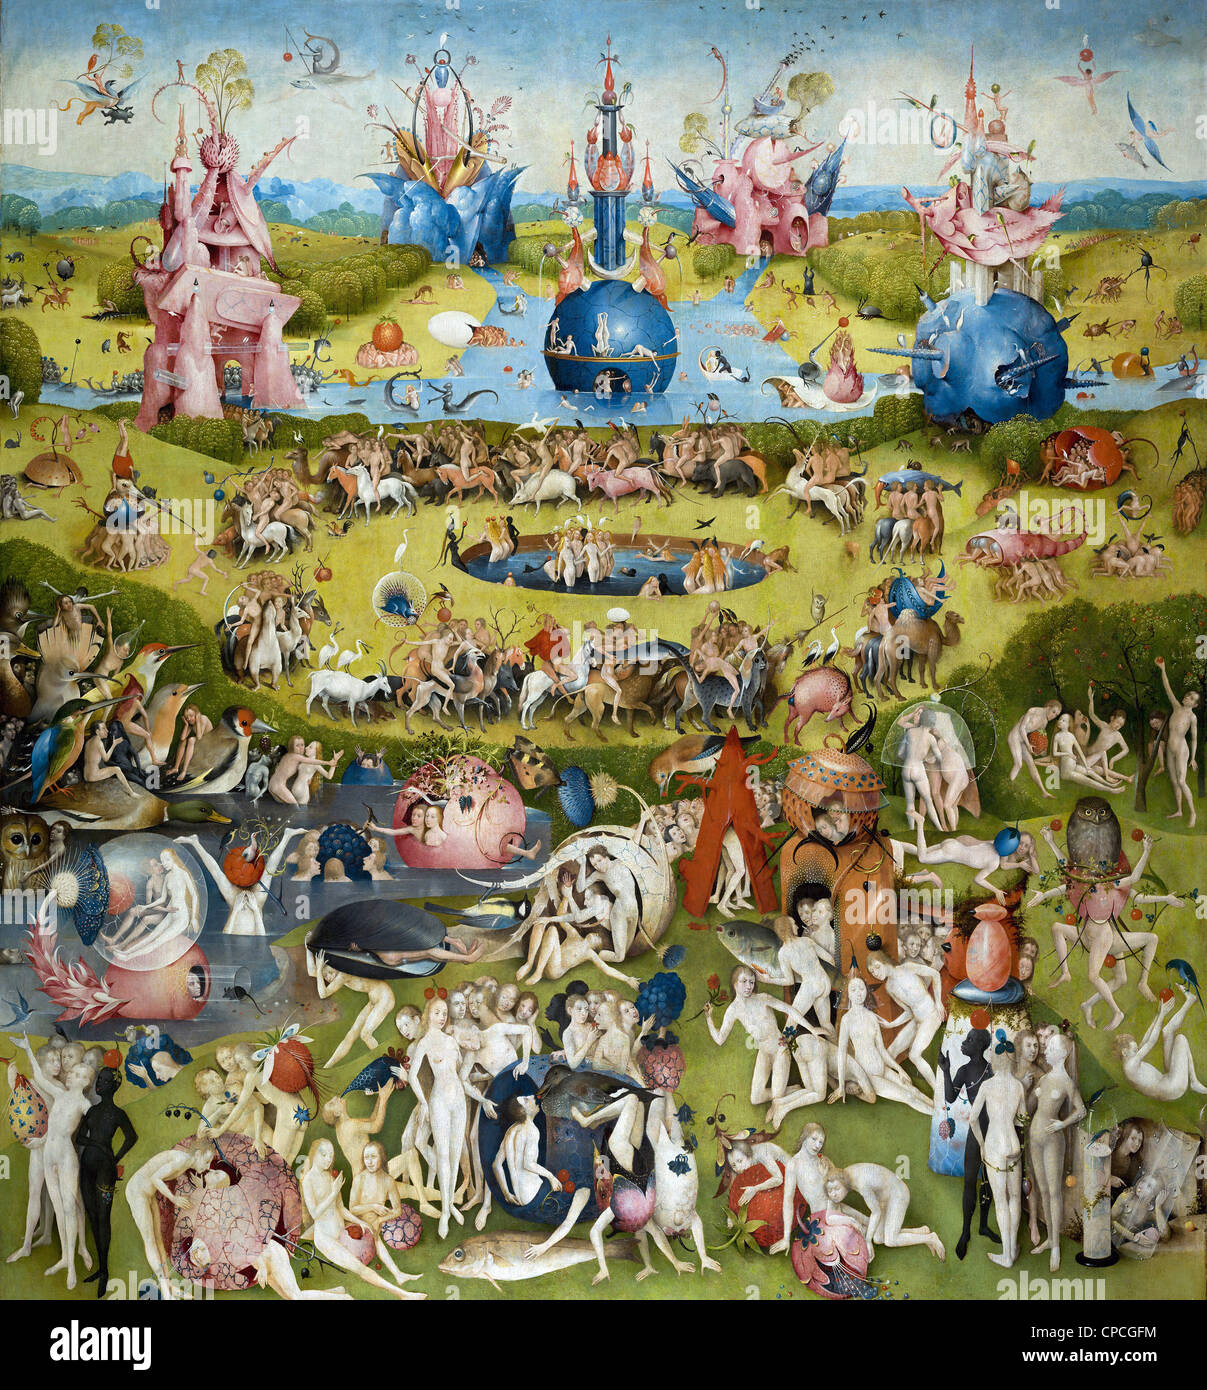 Hieronymus Bosch The Garden of Earthly Delights (central panel) 1504 Prado  museum - Madrid Stock Photo - Alamy